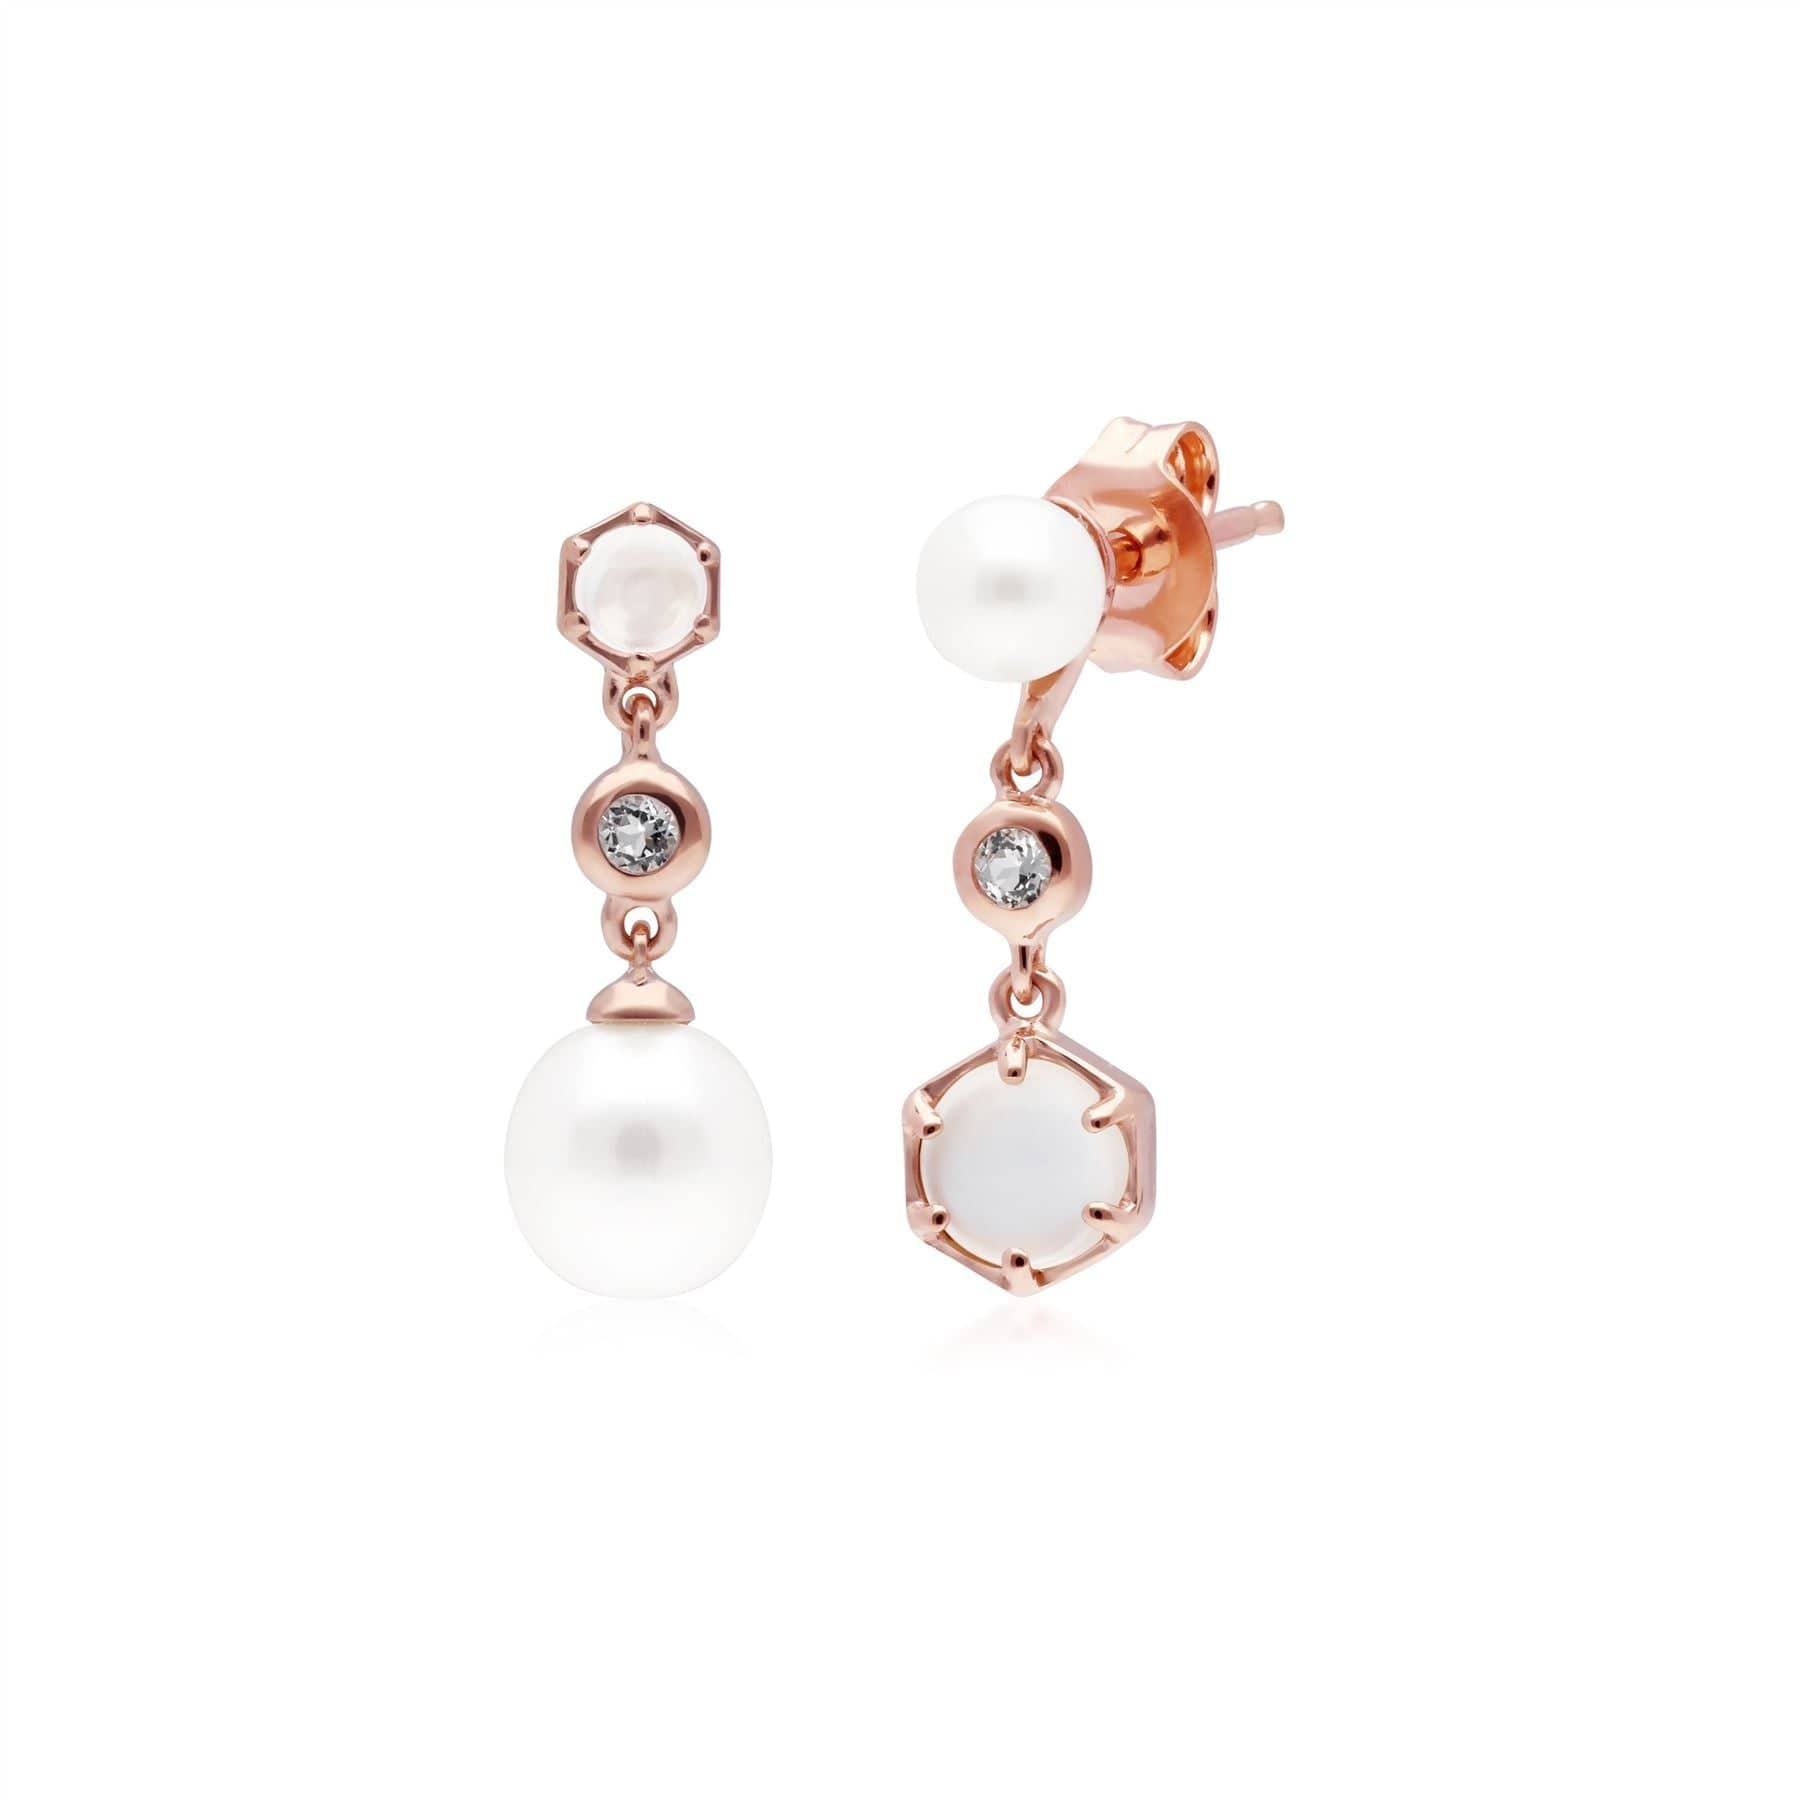 Photos - Earrings Modern Pearl, Moonstone & Topaz Mismatched Drop  in Rose Gold Plat